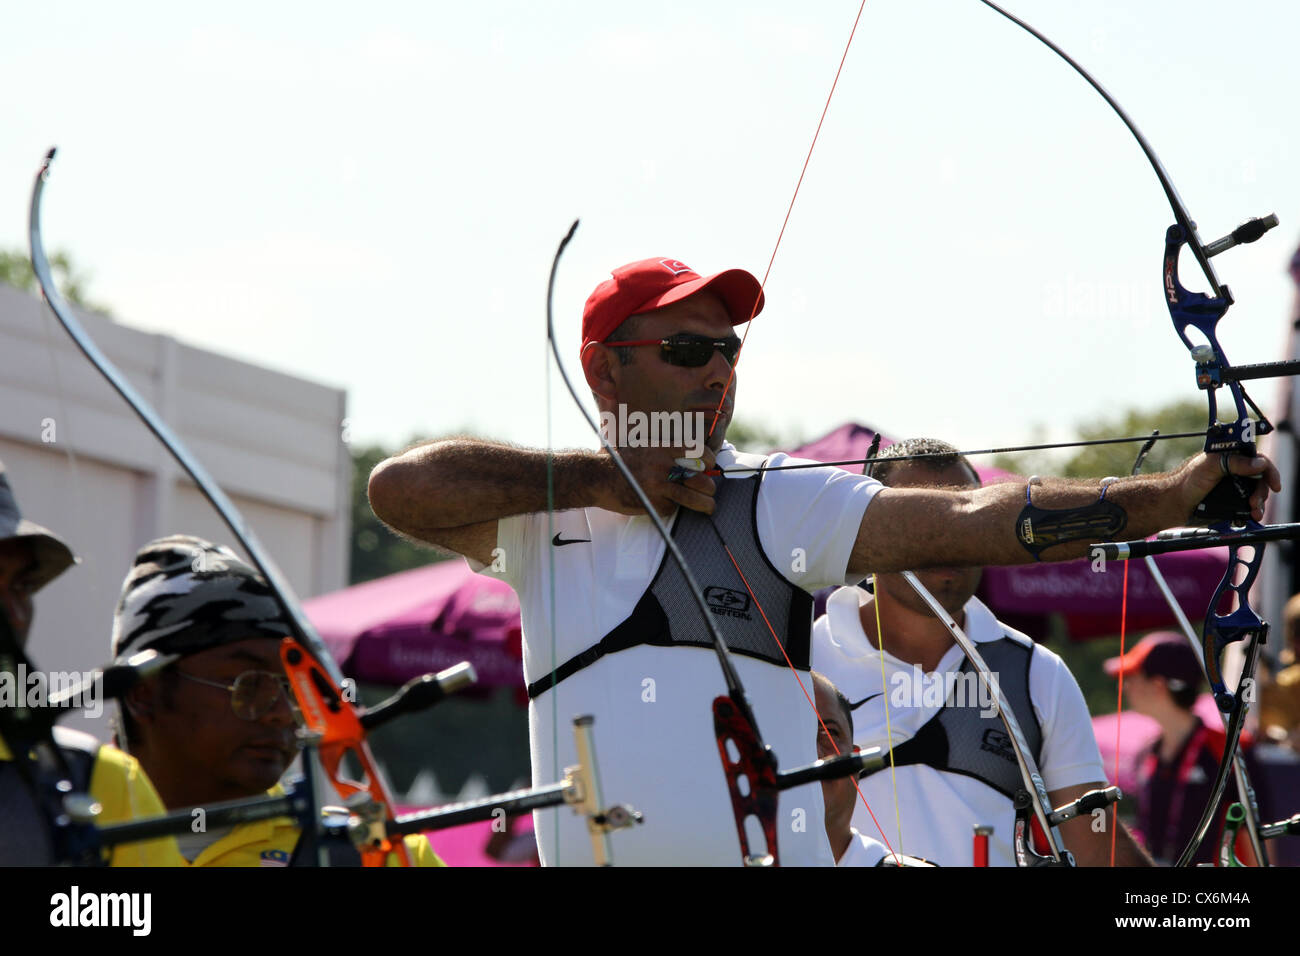 Zafer Korkmaz of Turkey in the Men's Team Recurve - Open archery at the Royal Artillery Barracks at London 2012 Paralympic games Stock Photo